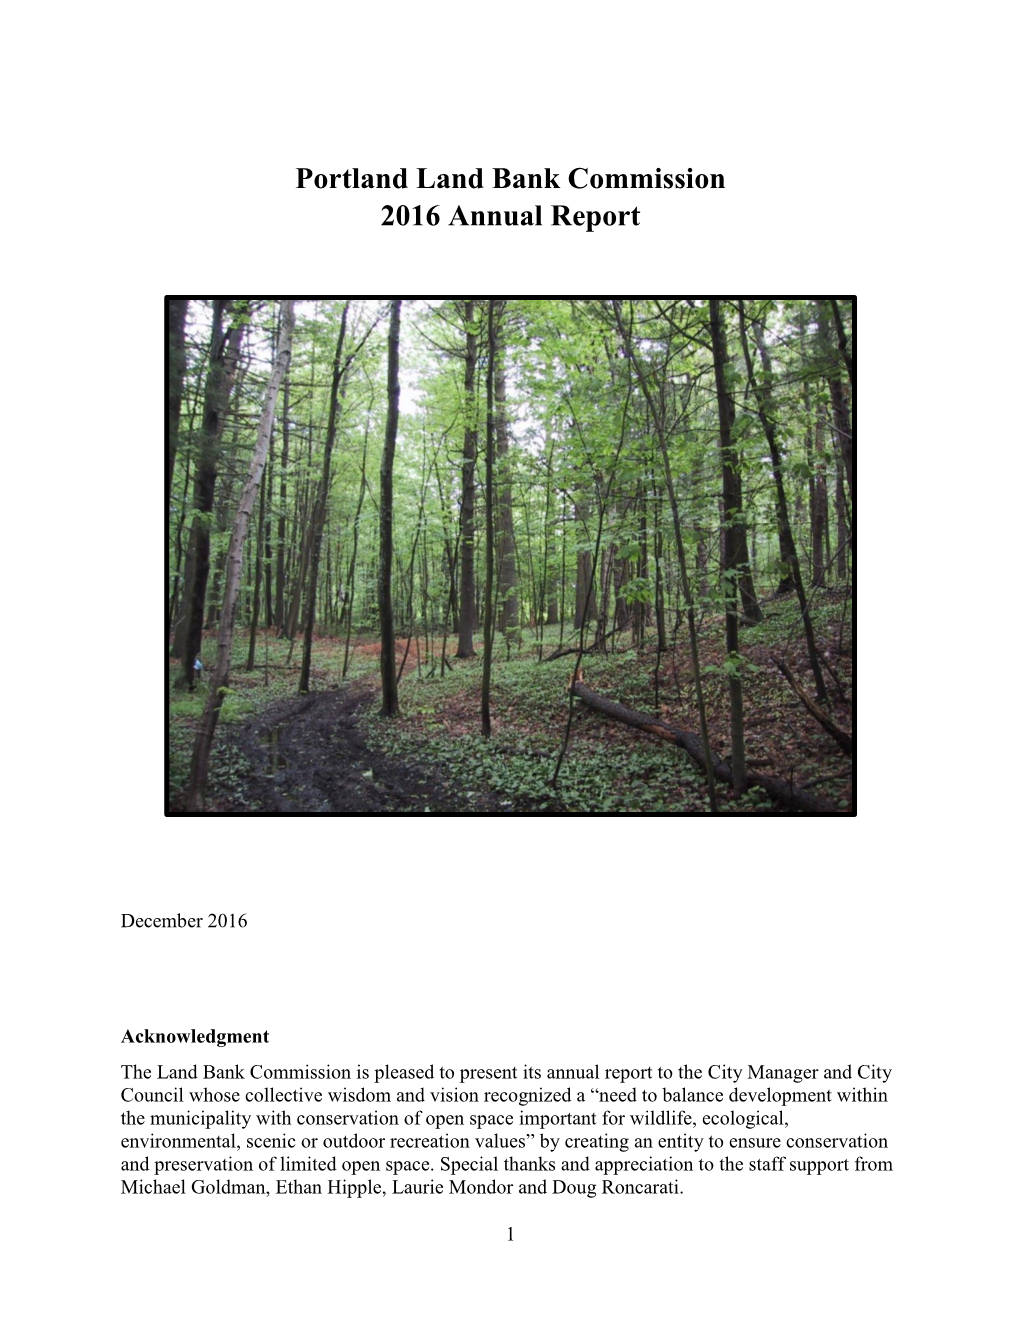 Portland Land Bank Commission 2016 Annual Report